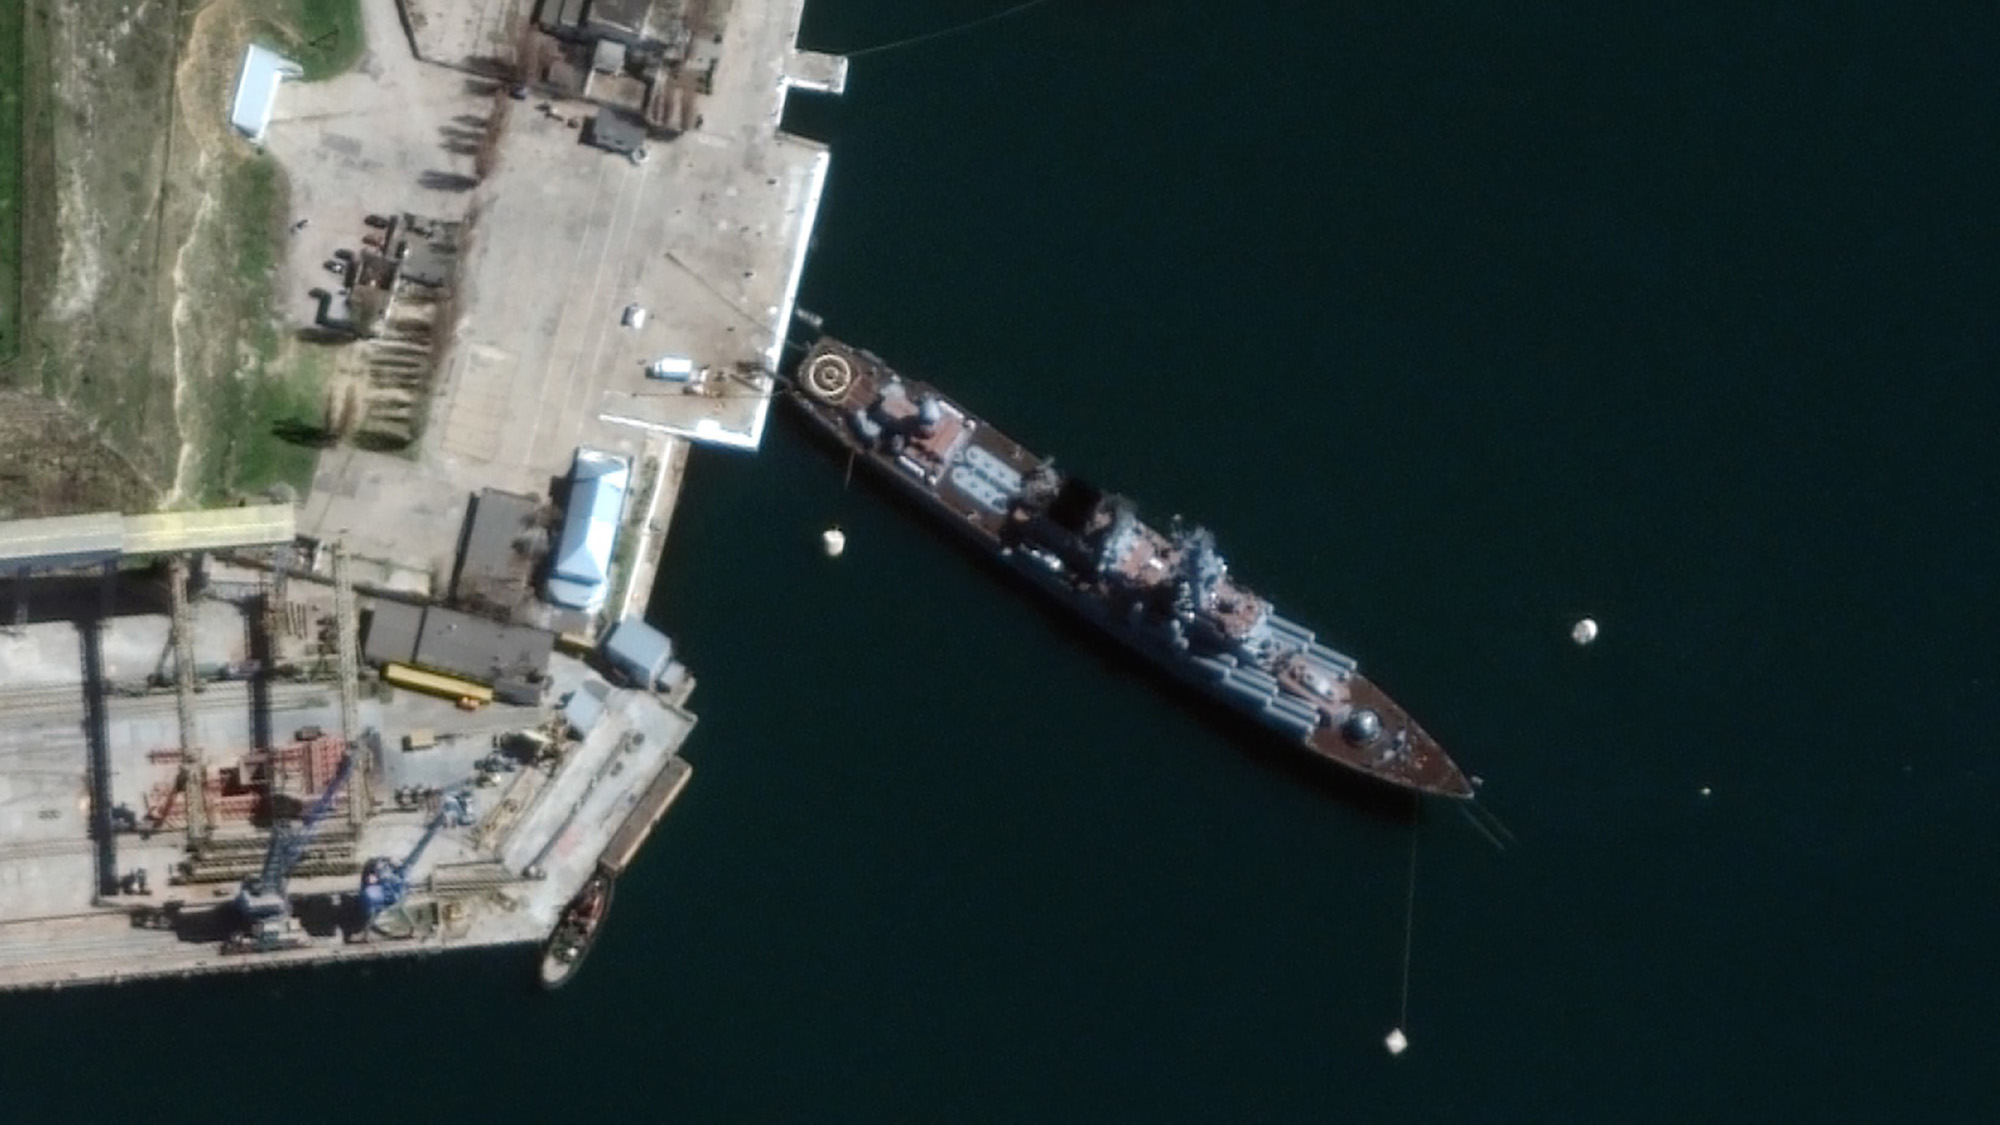 The Russian guided missile cruiser Moskva is seen in Sevastopol, Crimea in this satellite image on April 7. 